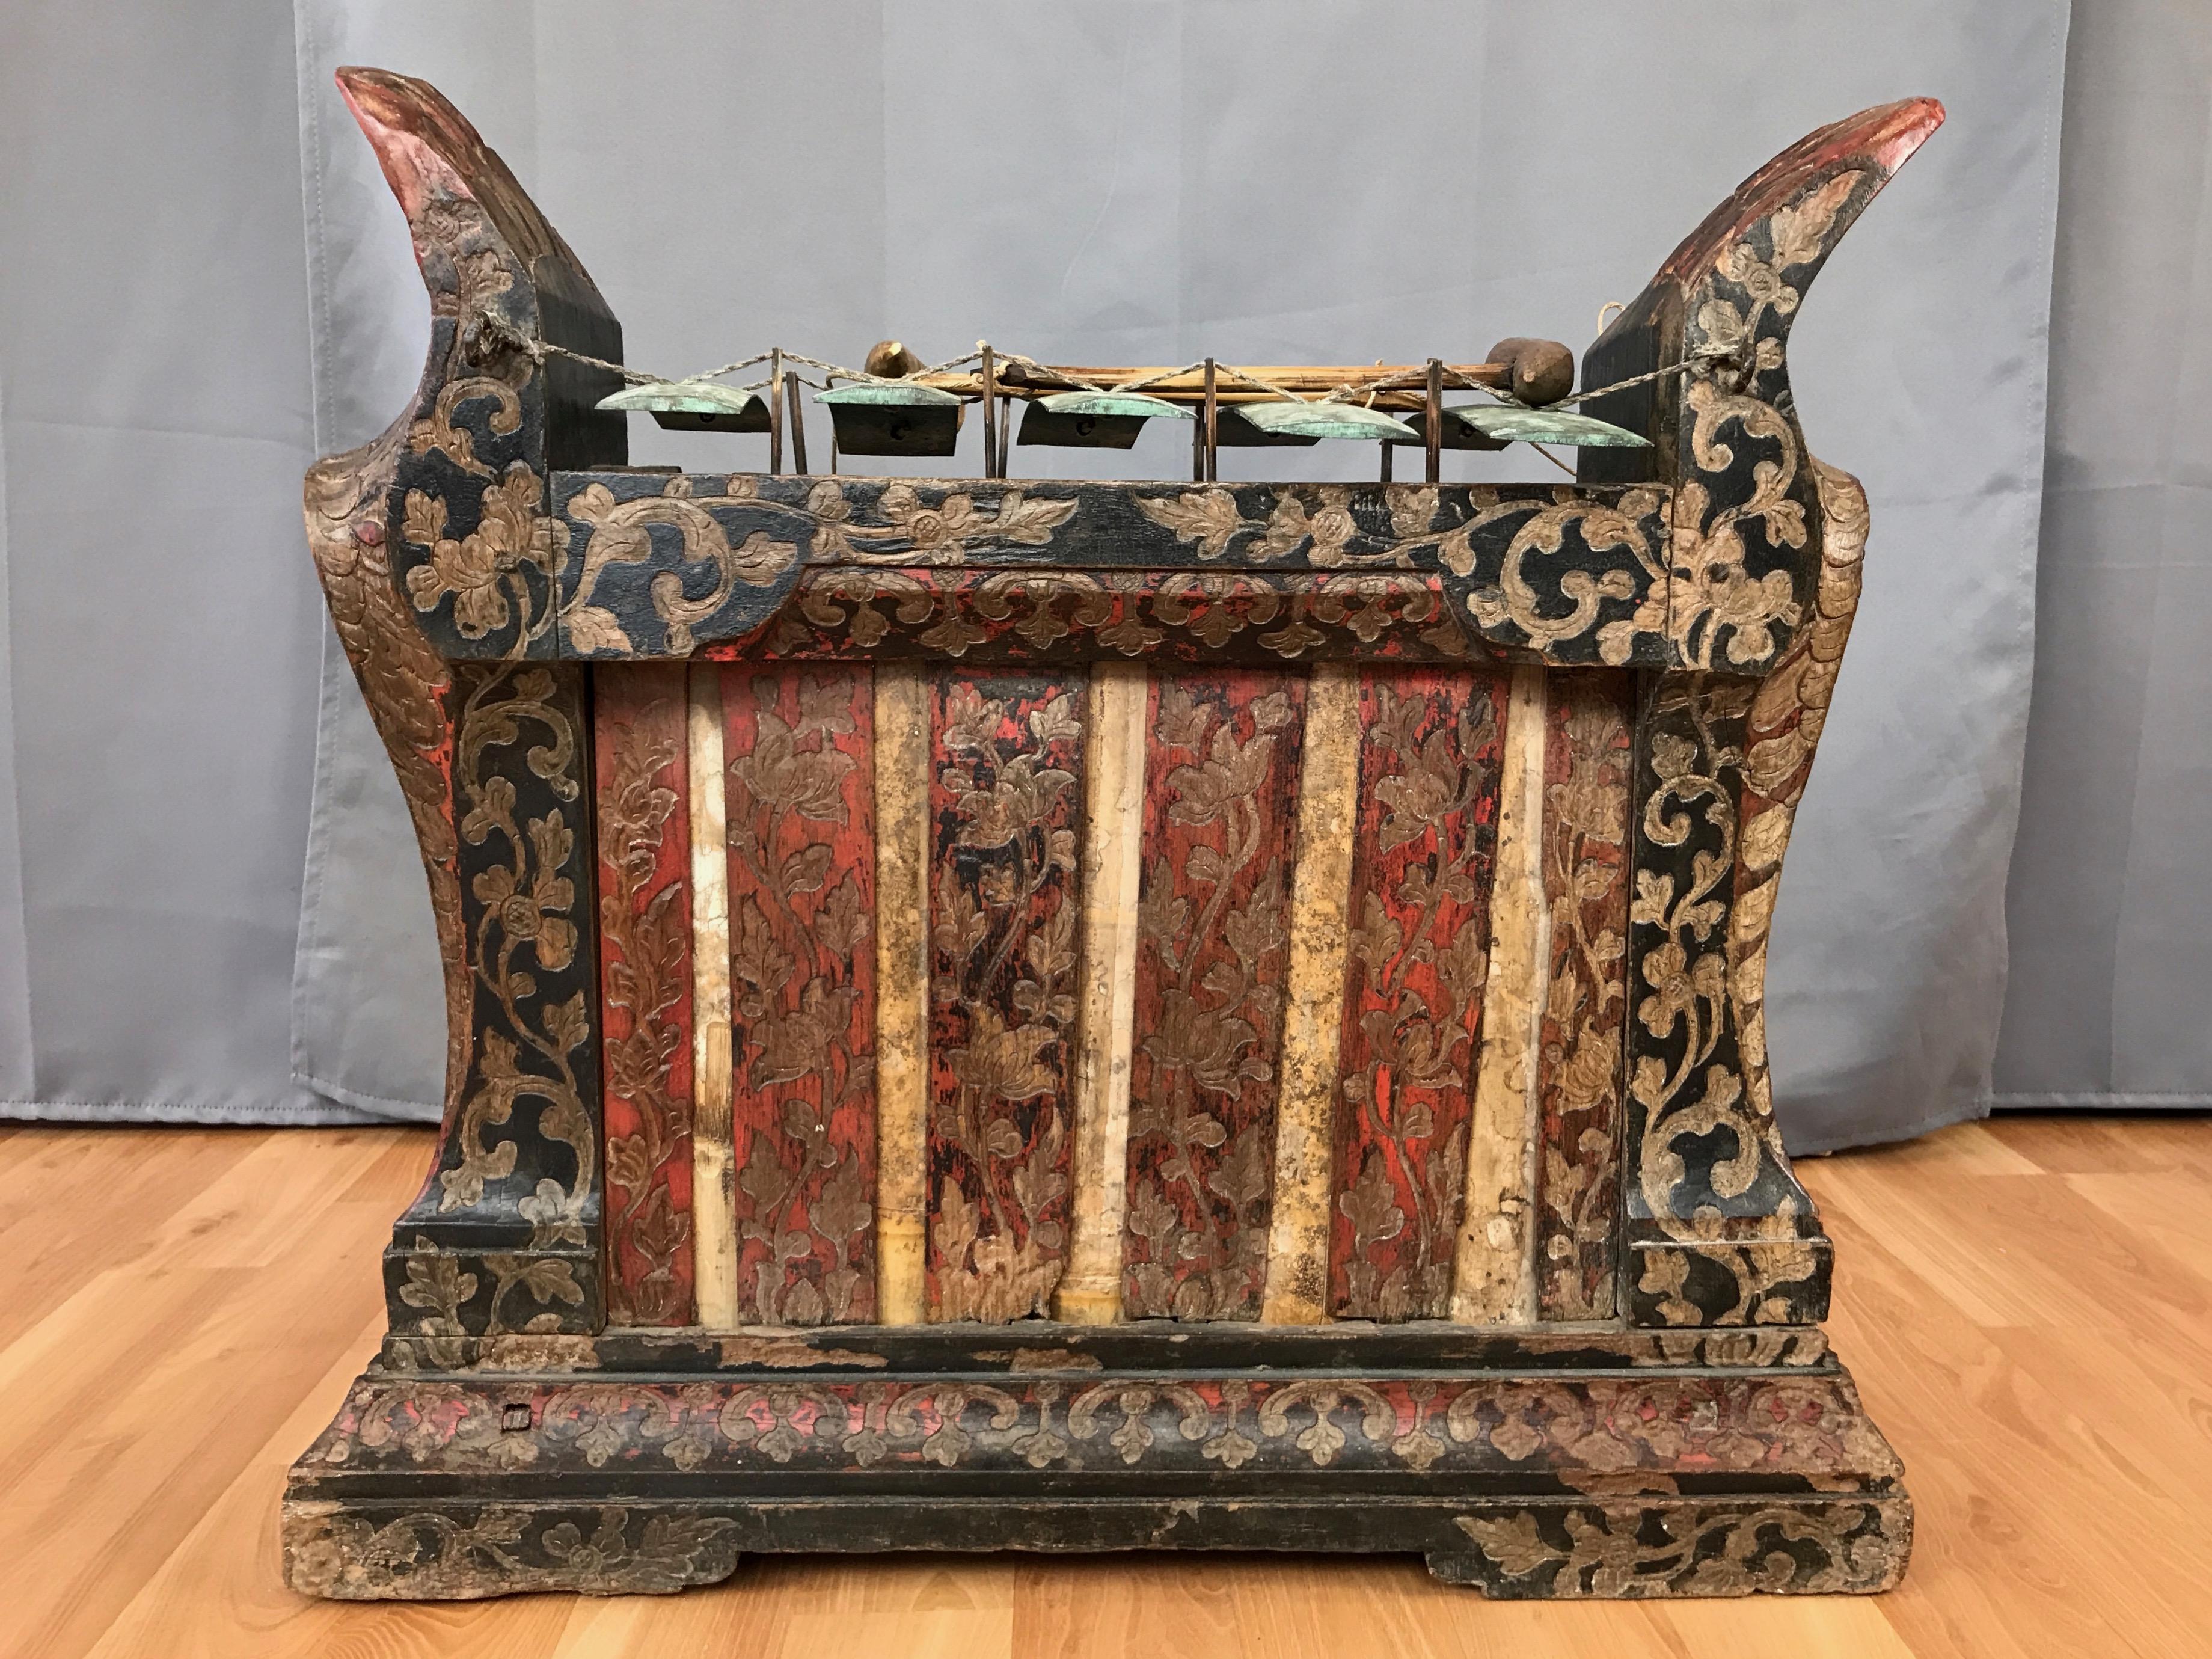 An enchanting 1940s Indonesian carved wood and bronze gambang gangsa with mallets.

A gambang gangsa is a metallophone—similar to a xylophone, but with tuned metal bars (or gongs) rather than wood—used in Balinese and Javanese traditional Gamelan